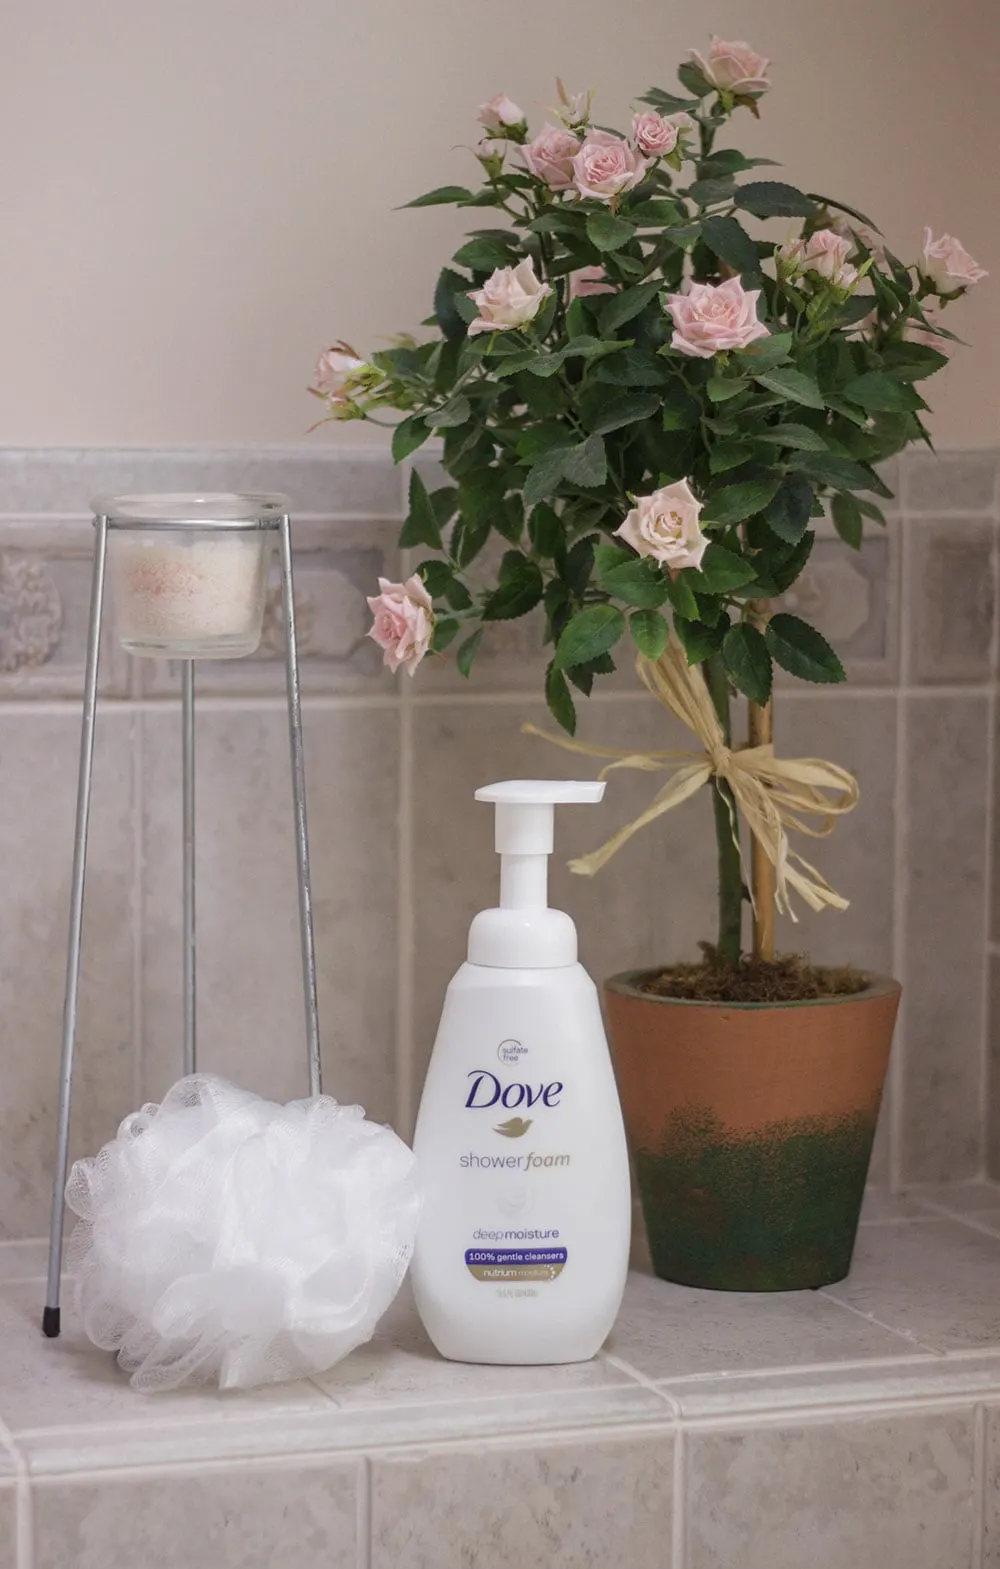 Dove shower foam and a bath poof.